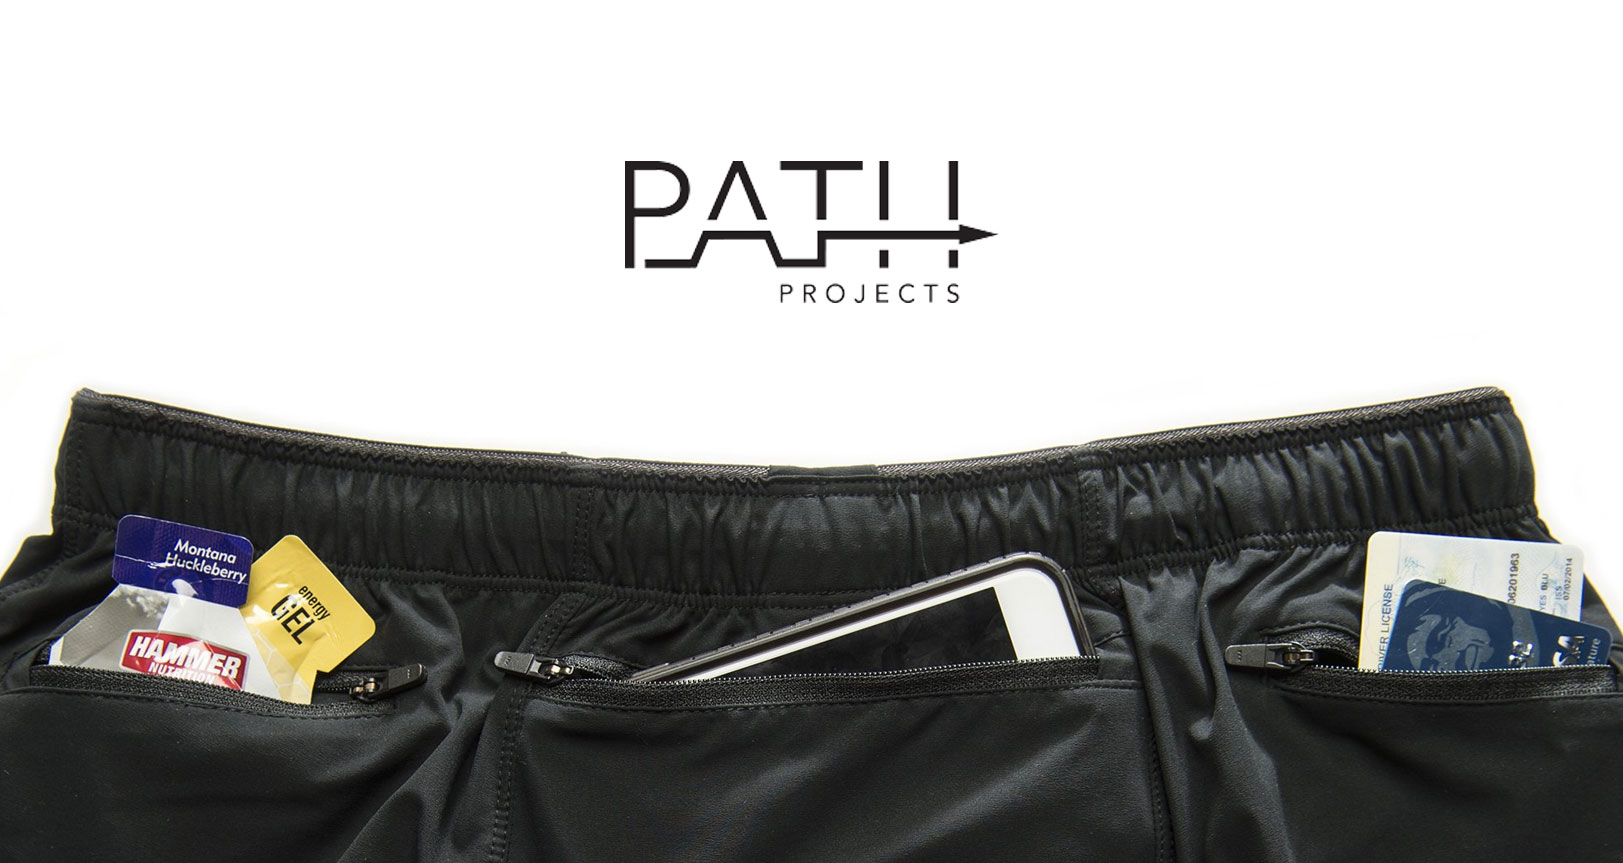 Path Projects Shorts Review - Believe in the Run